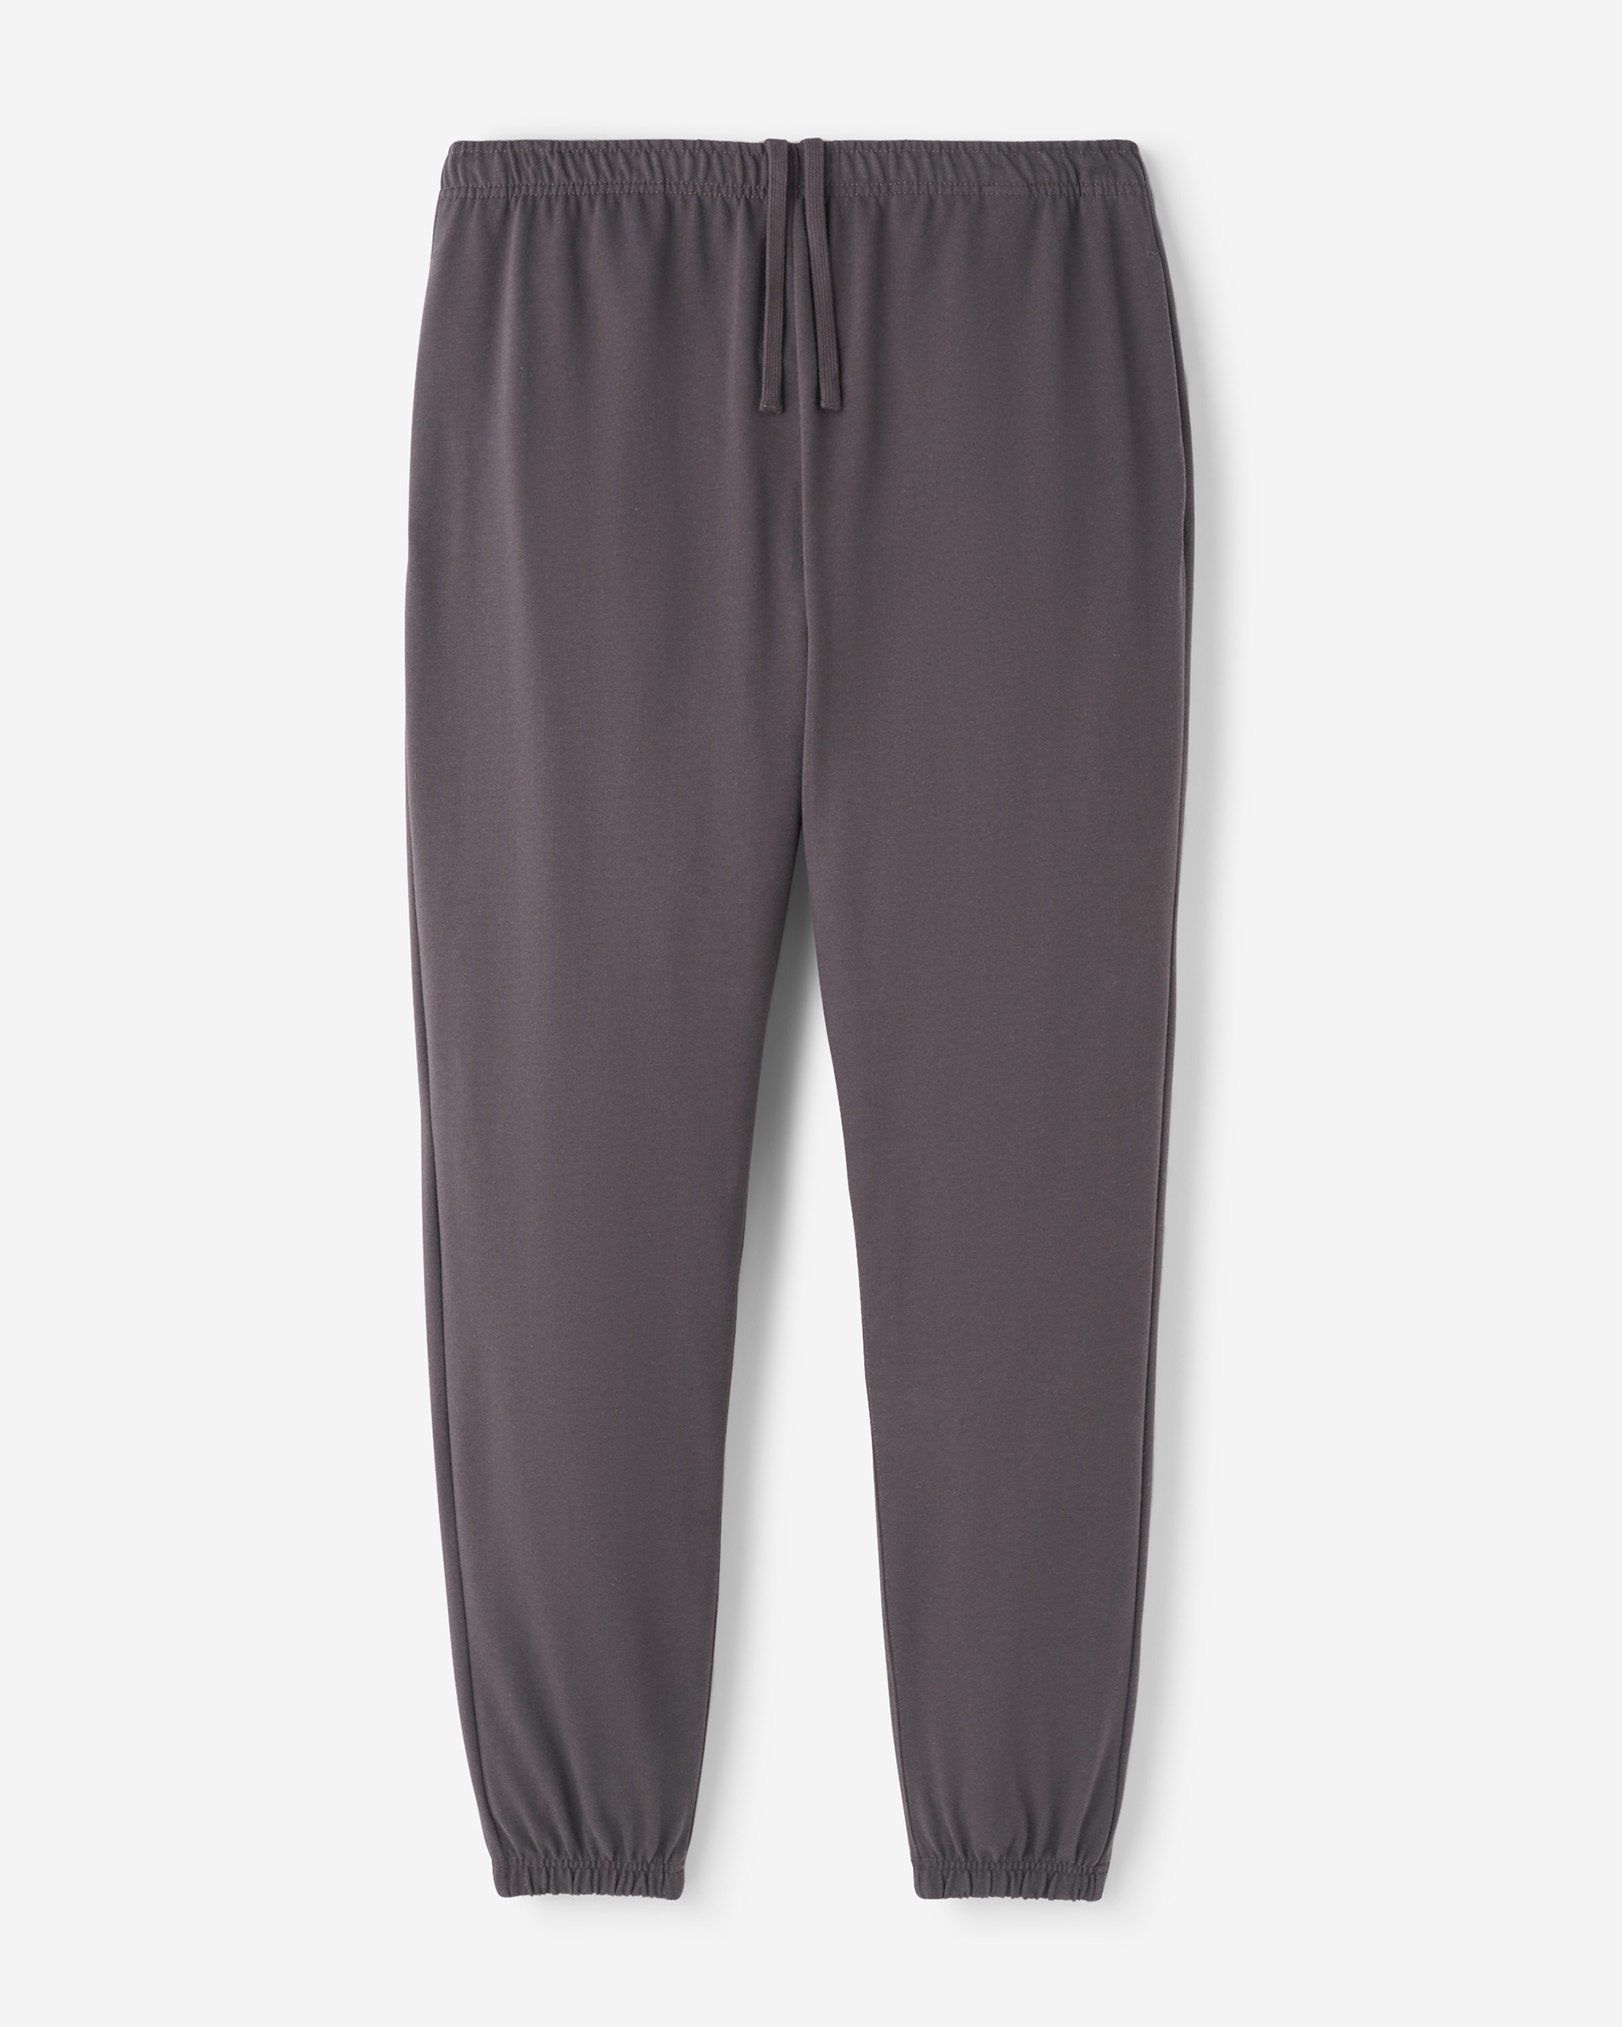 Roots Warm-Up Jersey Sweatpant Pants in Charcoal Black